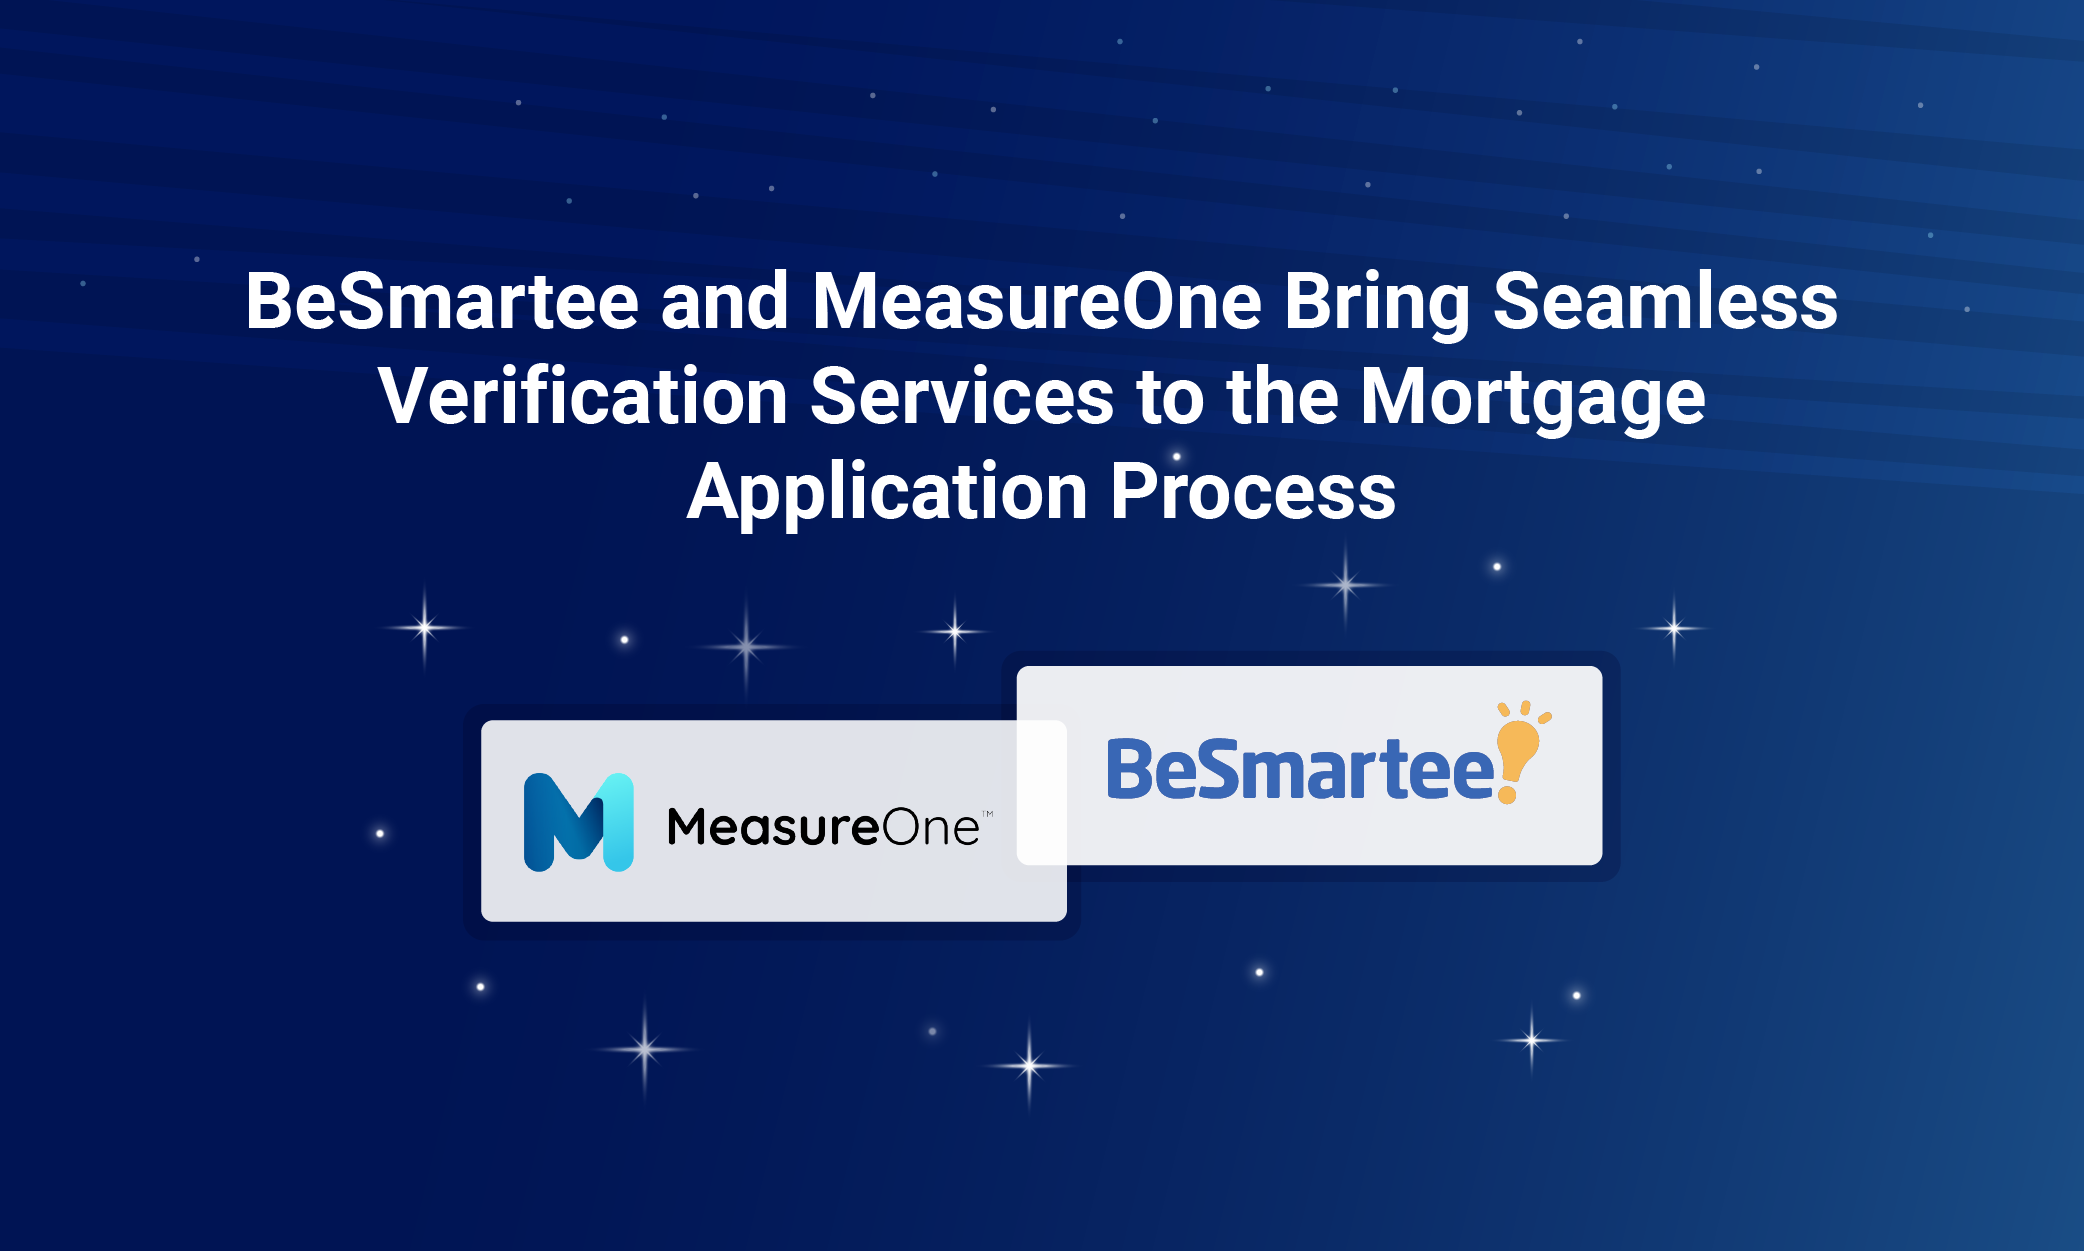 BeSmartee and MeasureOne Bring Seamless Verification Services to the Mortgage Application Process